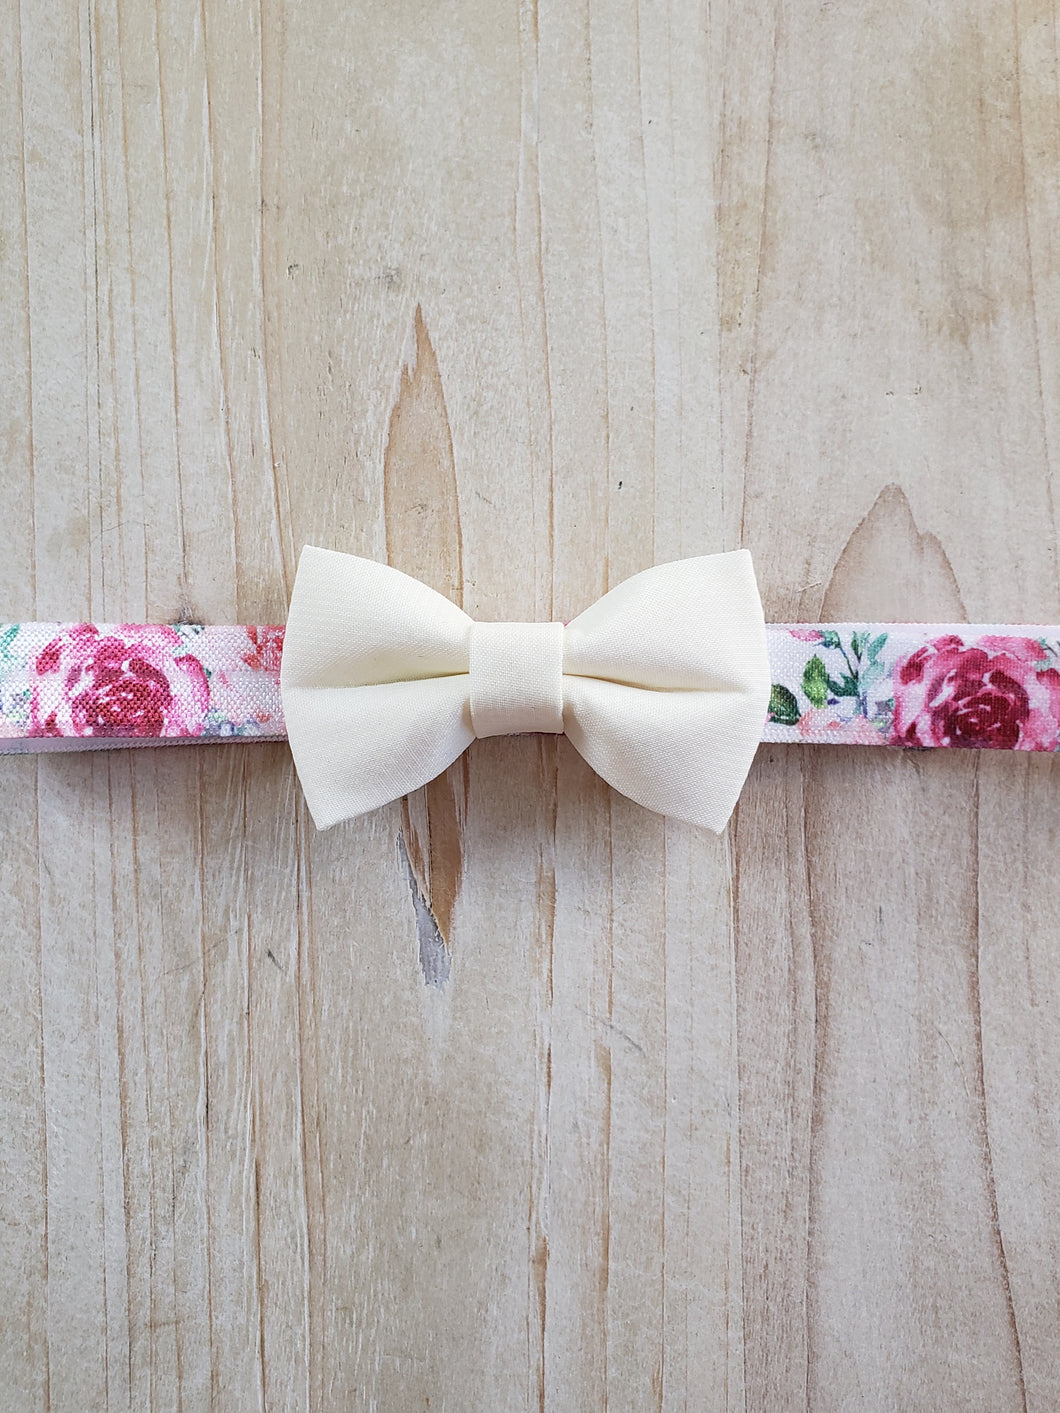 Infant stretch Headband- White Floral Bow